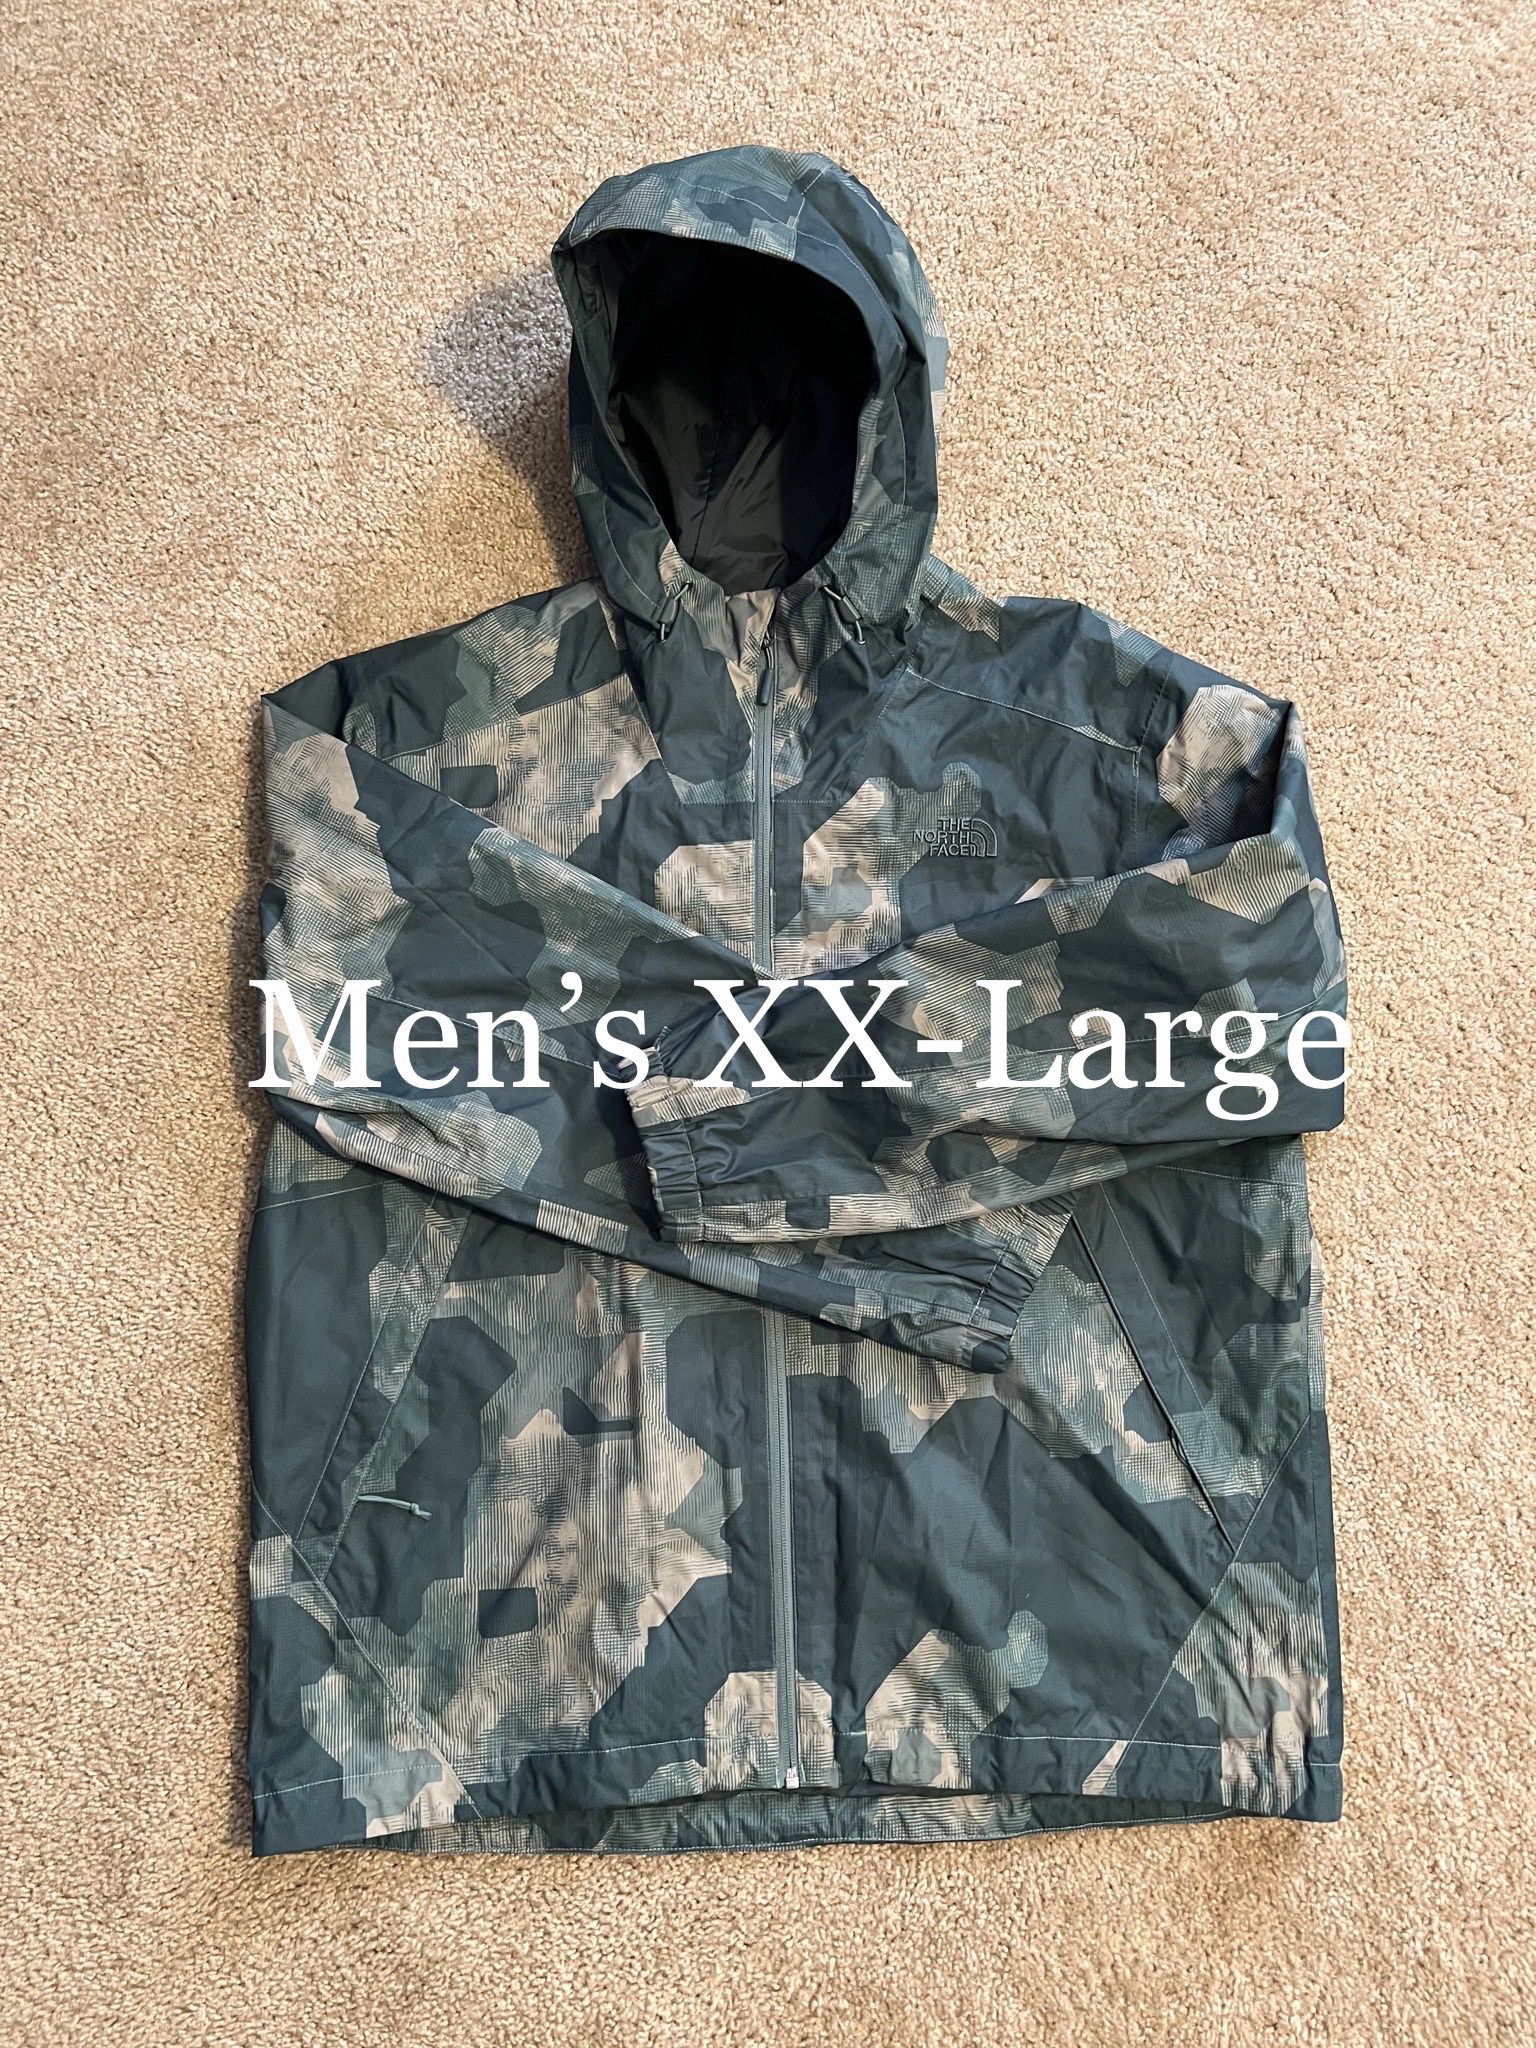 NORTH FACE / HyVent Tuff-Skin Coat WATERPROOF Jacket w/ Hood / SIZE: Men's XX-Large / Brand New w/o Tags! / Abstract Camo